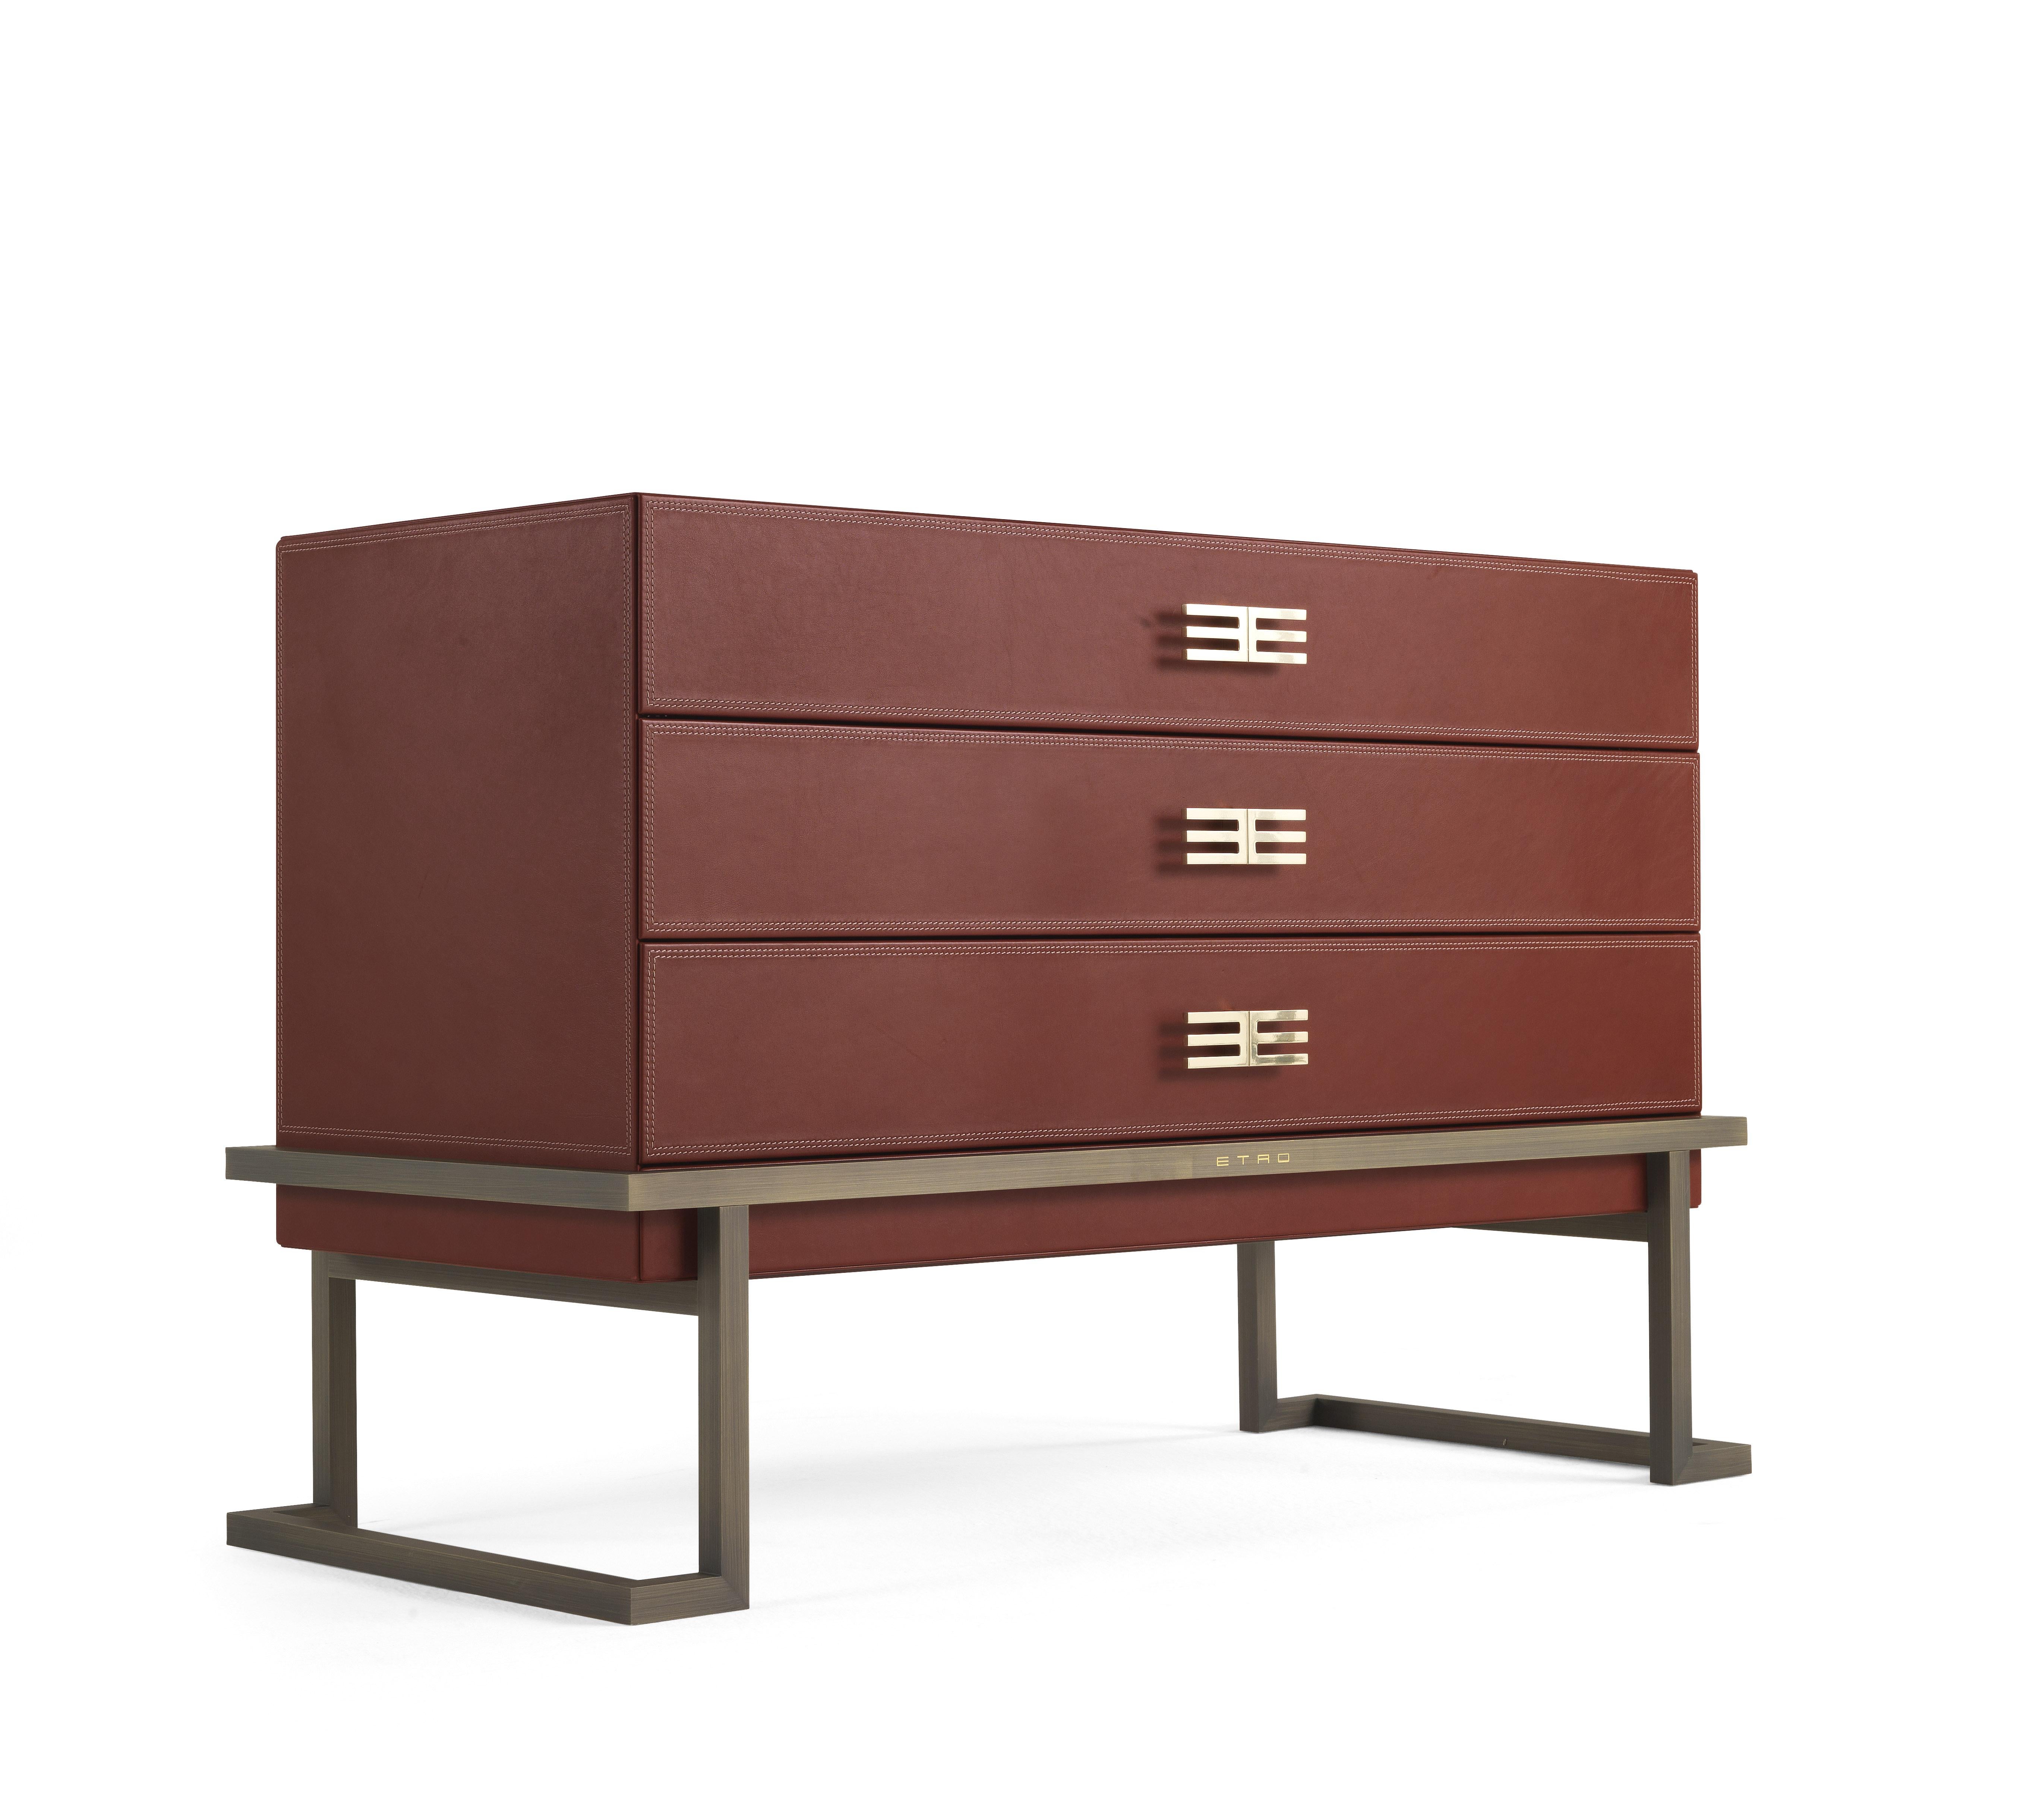 New, captivating upholstery for the evocative Kolkata chest of drawers. The peculiarity is the processing of the leather upholstery, sewn on the edges to emphasize the corners of the furniture. The piece of furniture is enhanced by decorative